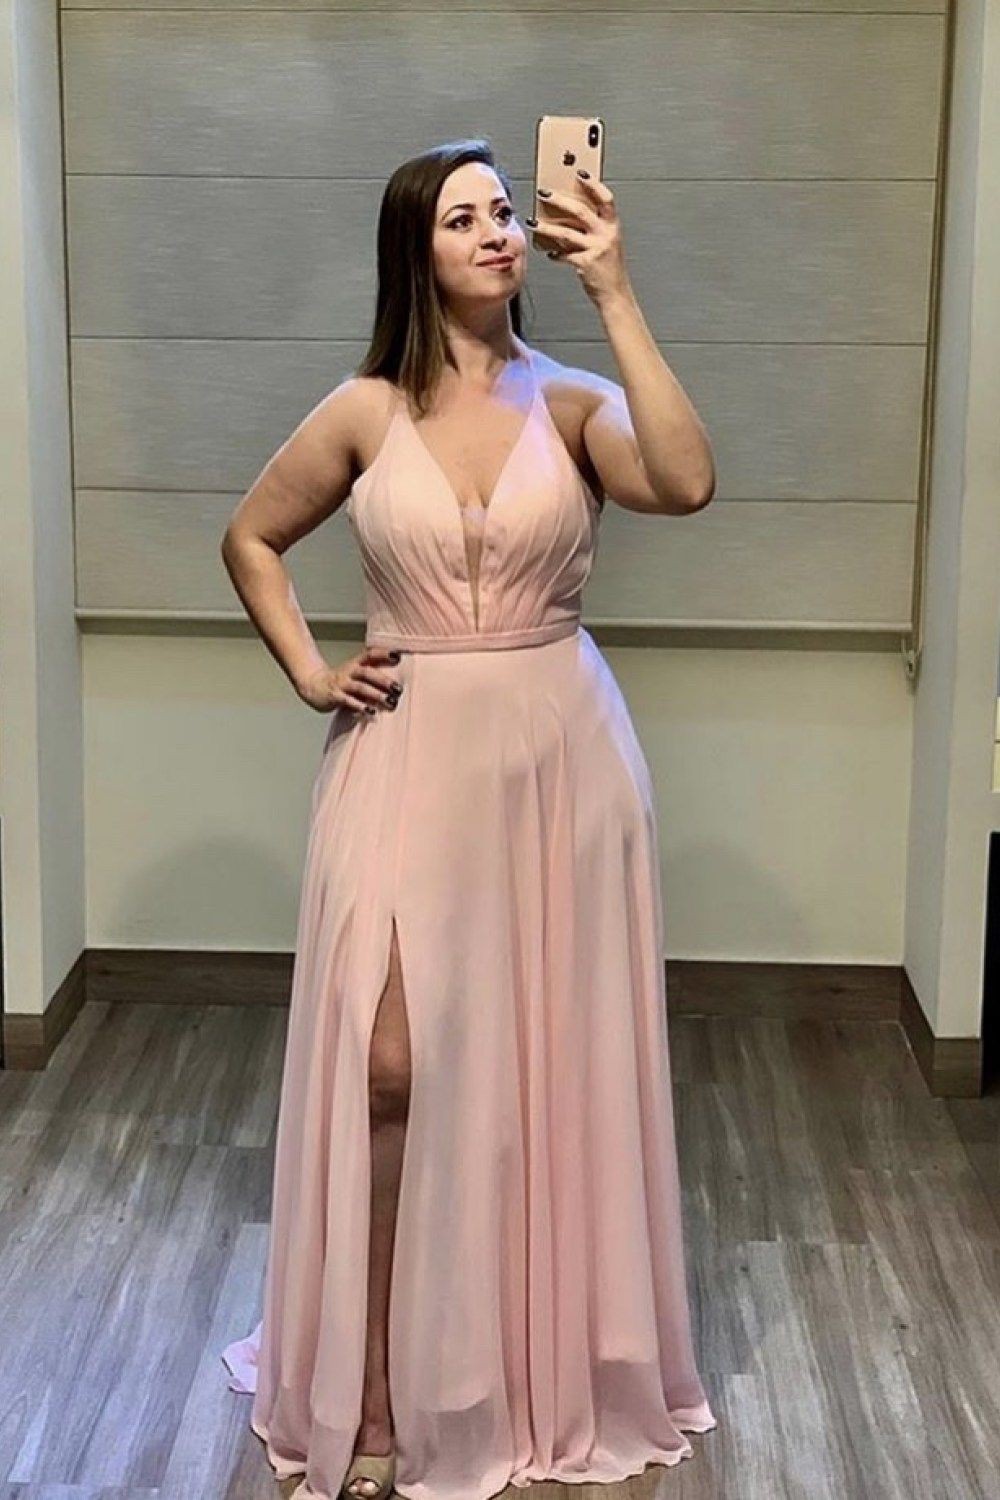 Pink outfit with bridal party dress, cocktail dress, wedding dress: Cocktail Dresses,  Wedding dress,  fashion model,  Bridal Party Dress,  Pink Outfit,  Curvy Prom Dresses  